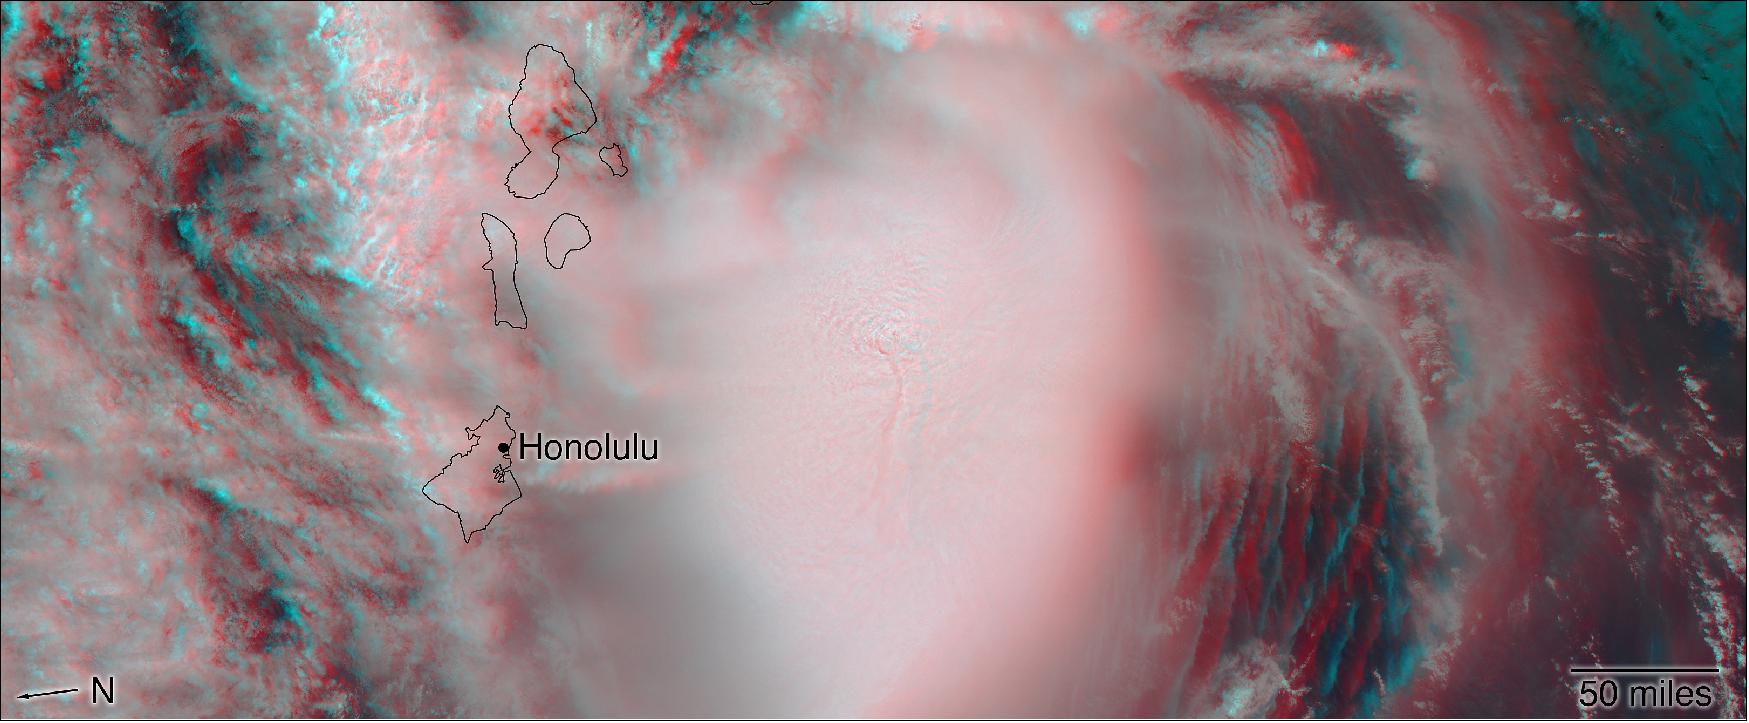 Figure 10: Stereo anaglyph using MISR data. The image shows a 3D view of Hurricane Lane on August 24. Red-blue 3D glasses required (image credit: NASA/GSFC/LaRC/JPL-Caltech, MISR Team)